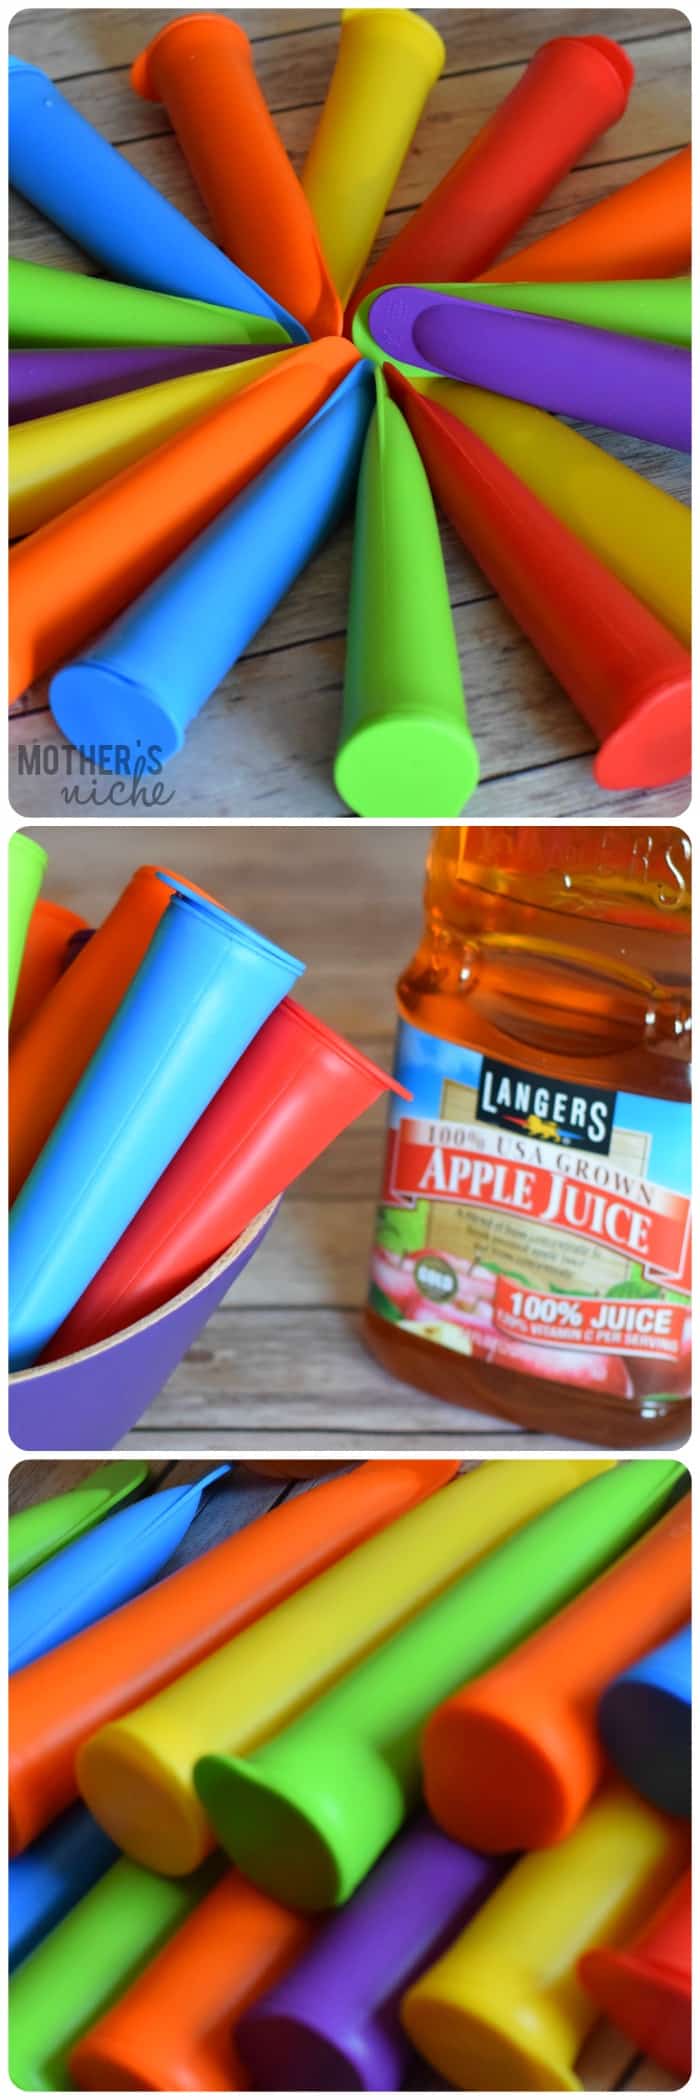 Make your own "otter pops" this summer with 100% juice and use these awesome reusable ice pop molds! Also, 6 awesome homemade popsicle recipes!